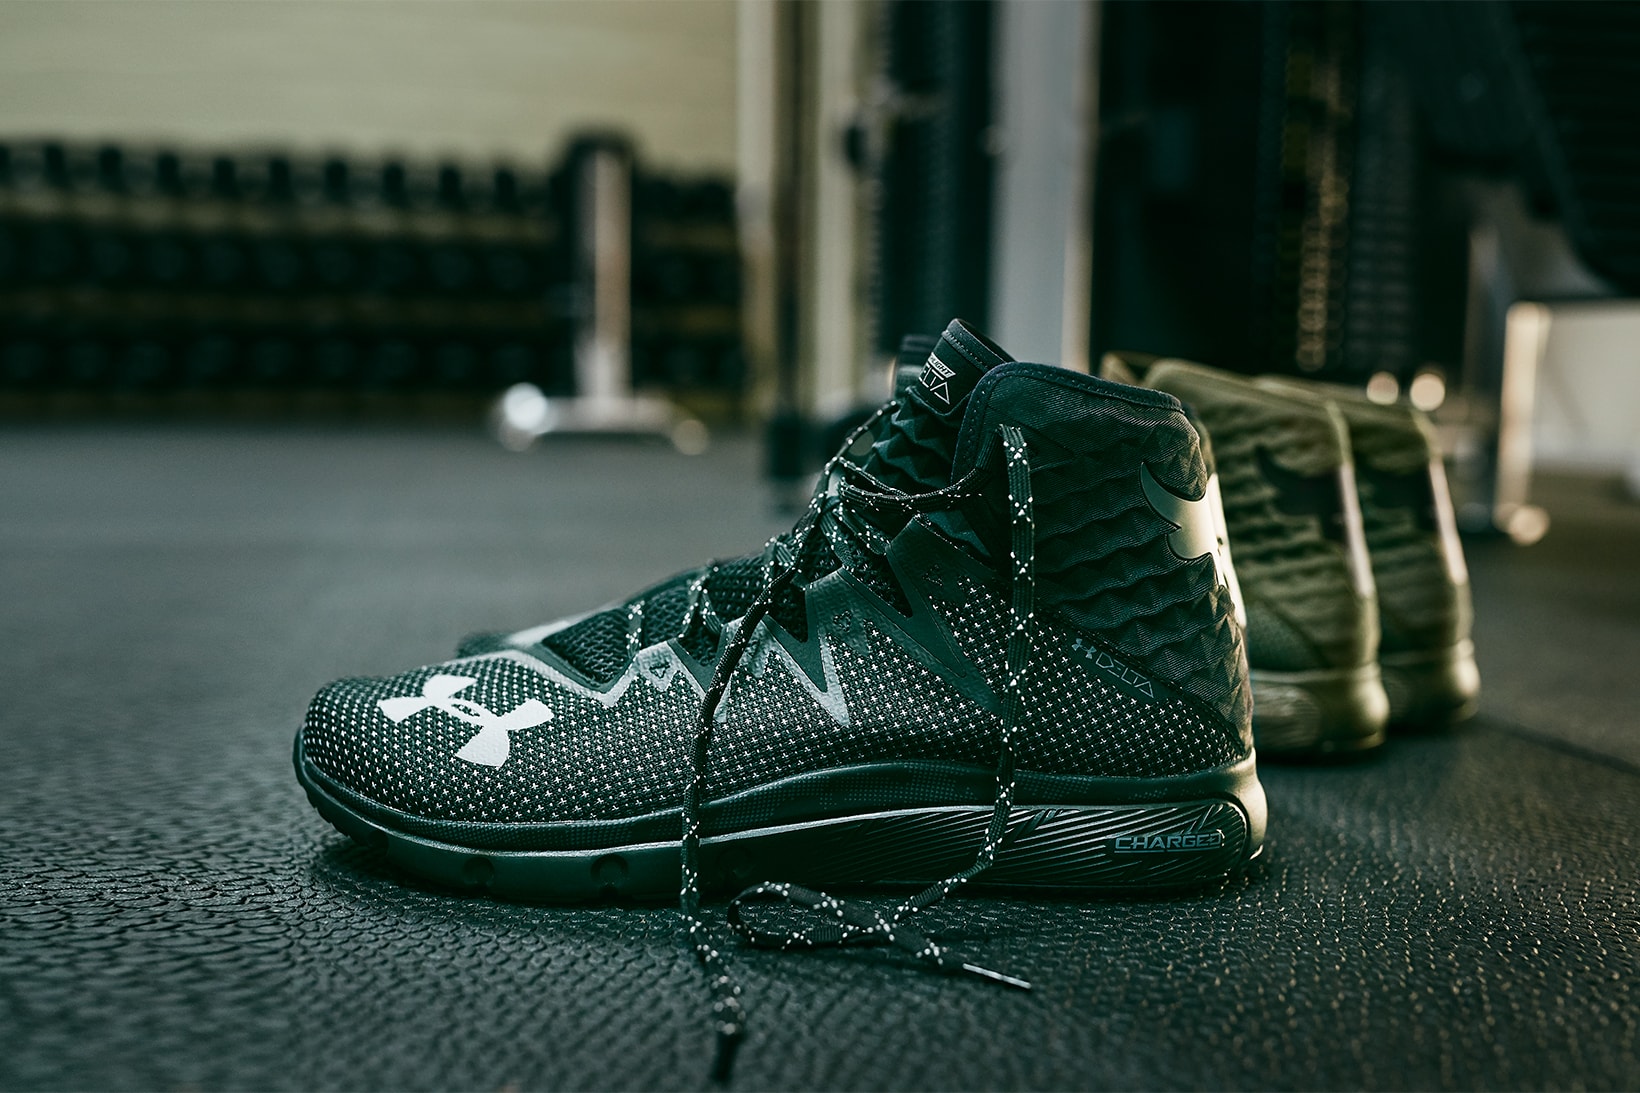 The Rock x Under Armour USDNA Collection